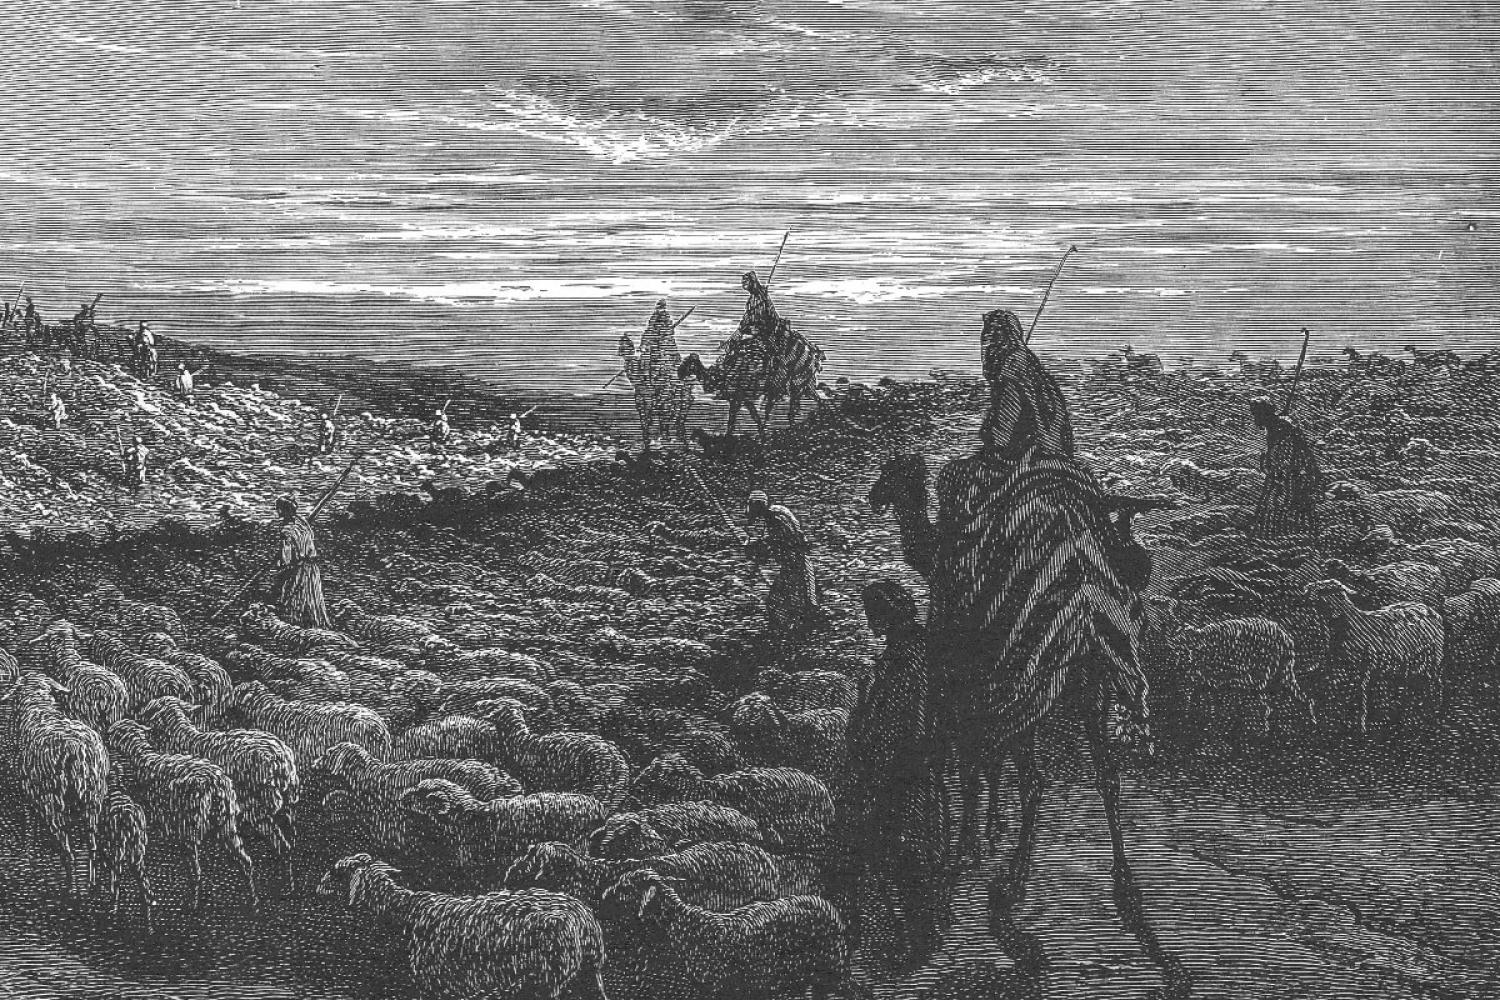 "Abraham Journeying into the Land of Canaan," by Gustave Dore